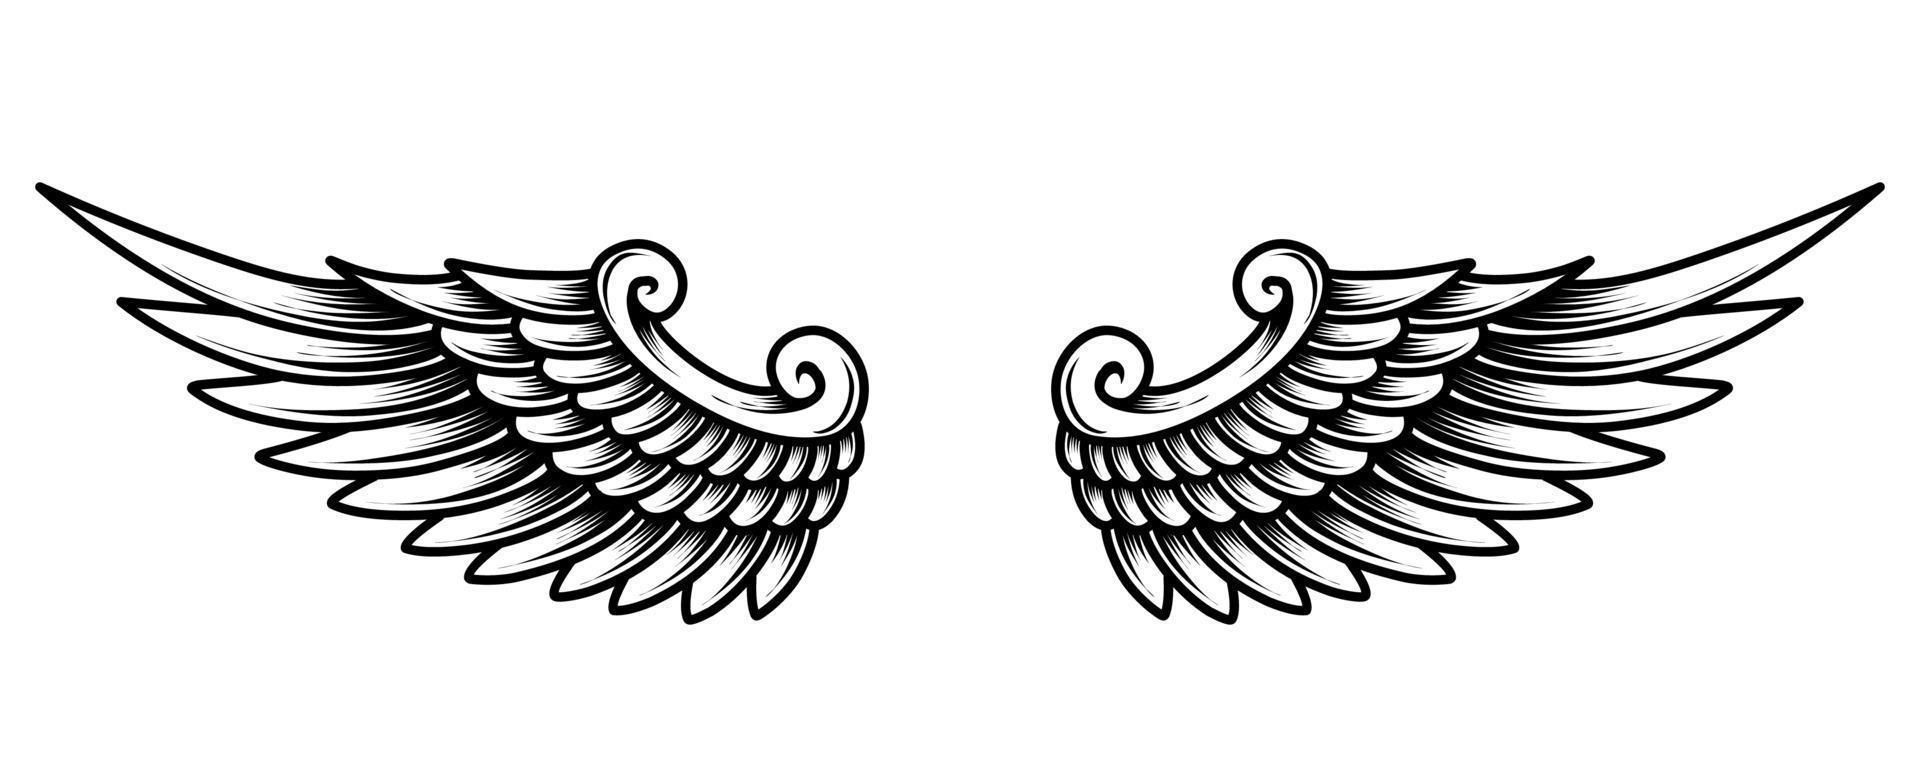 A black and white illustration of a pair of angel wings vector